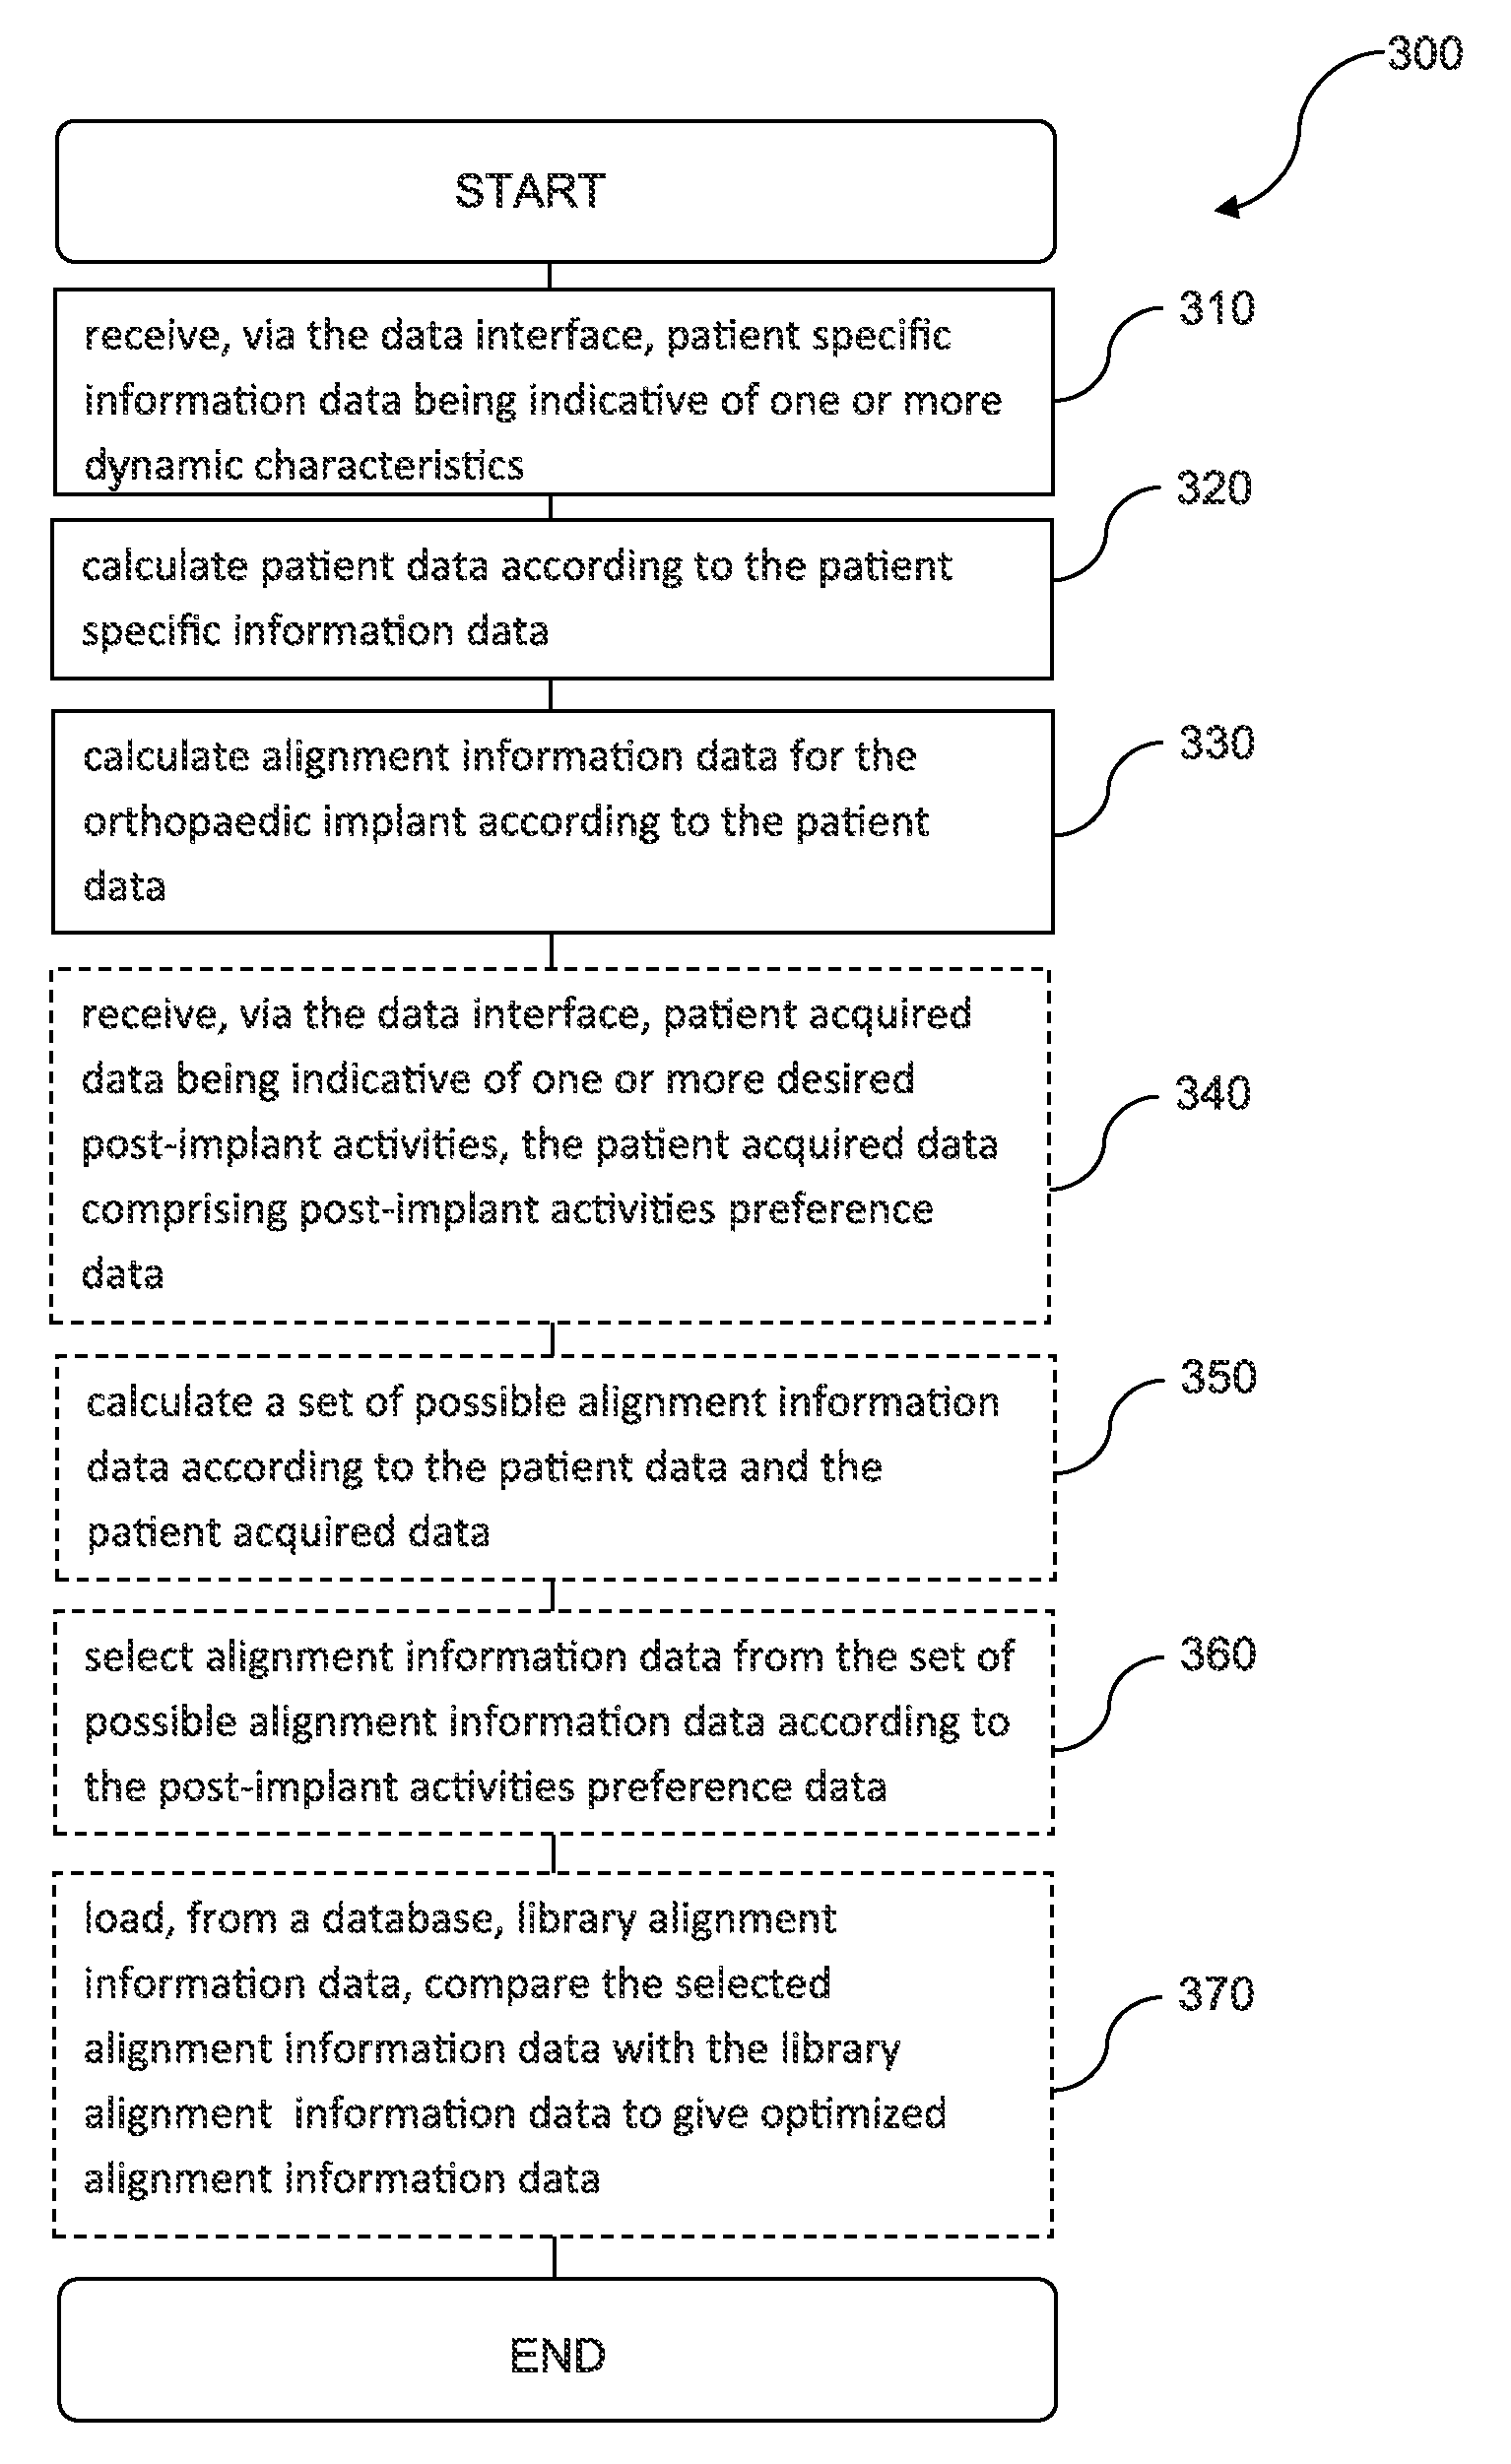 Computer-implemented method, a computing device and a computer readable storage medium for providing alignment information data for the alignment of an orthopaedic implant for a joint of a patient